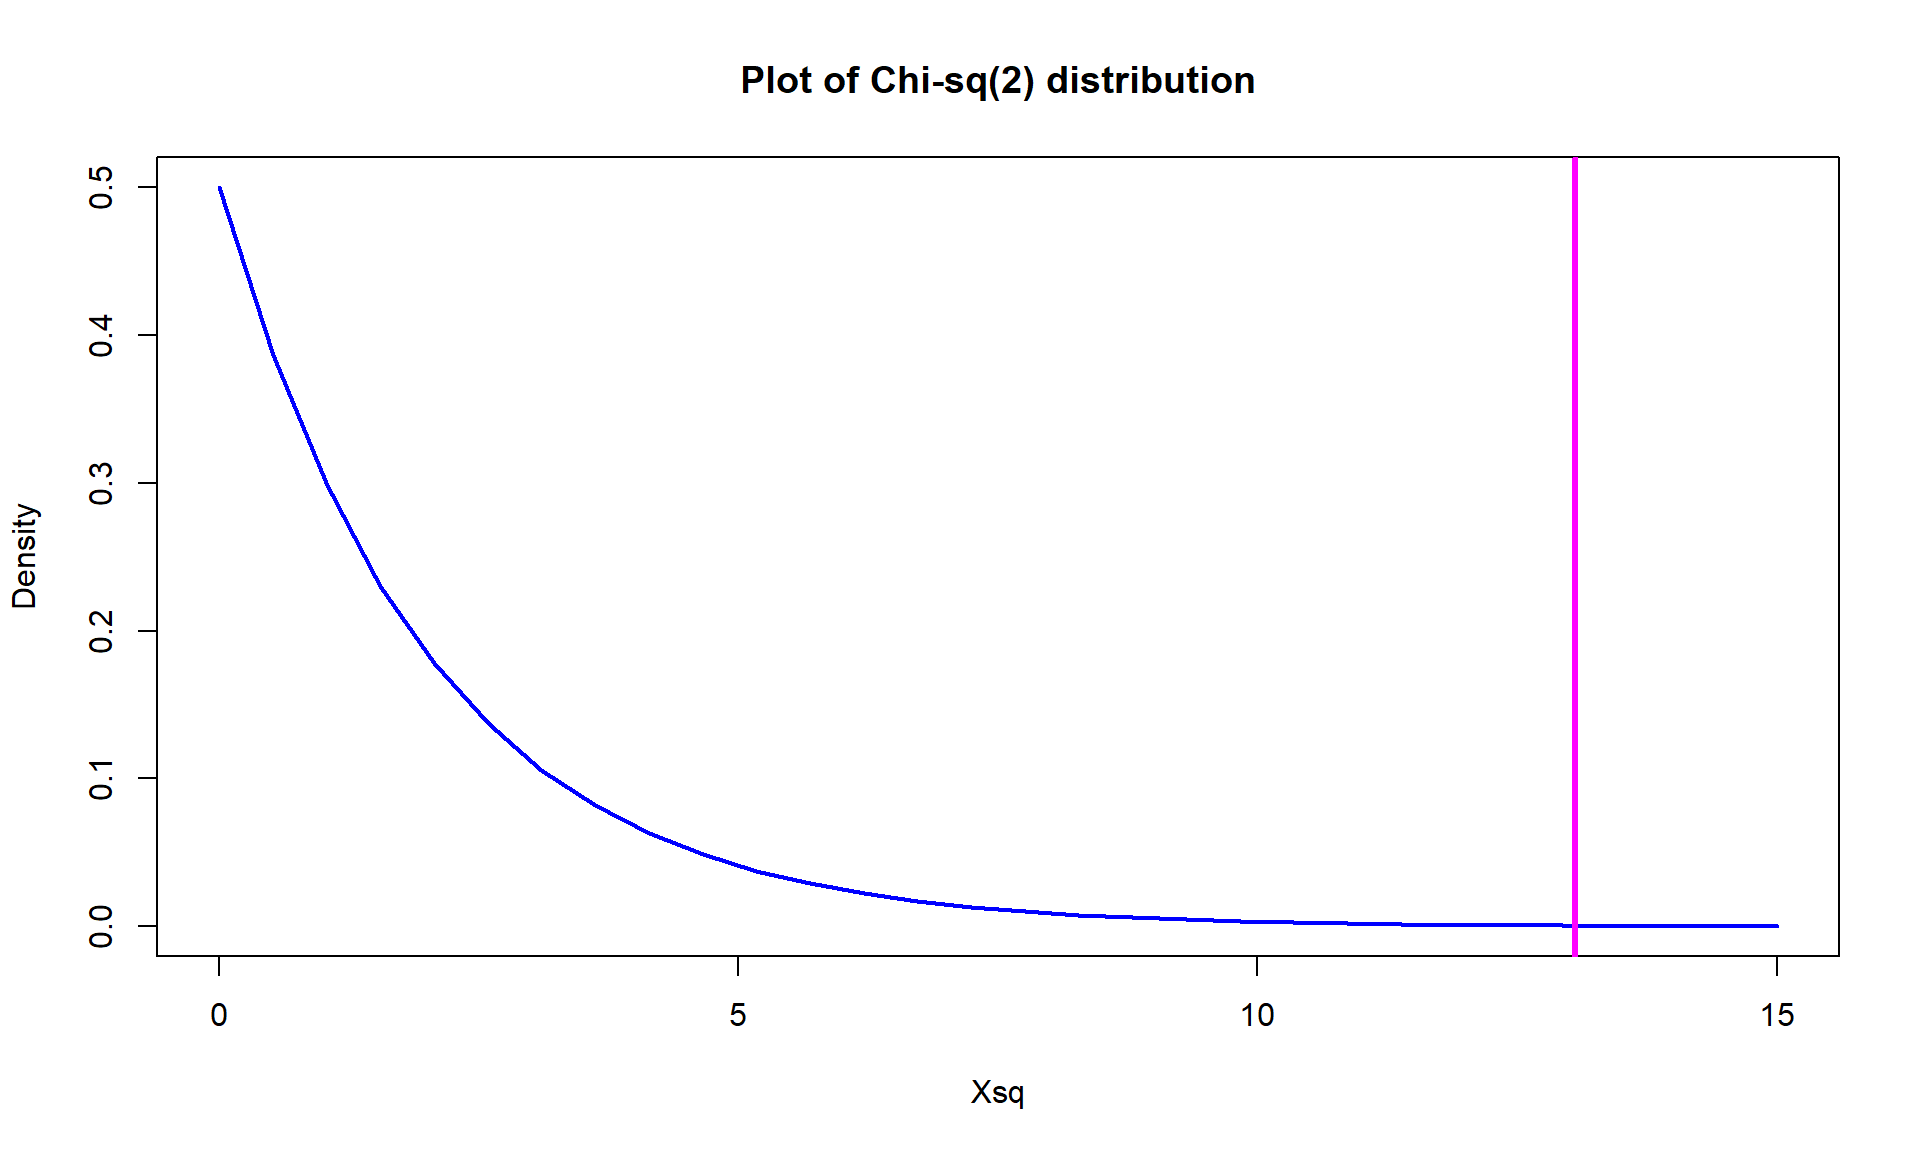 \(\boldsymbol{\chi^2}\)-distribution with two degrees of freedom with the observed statistic of 13.1 indicated with a vertical line.